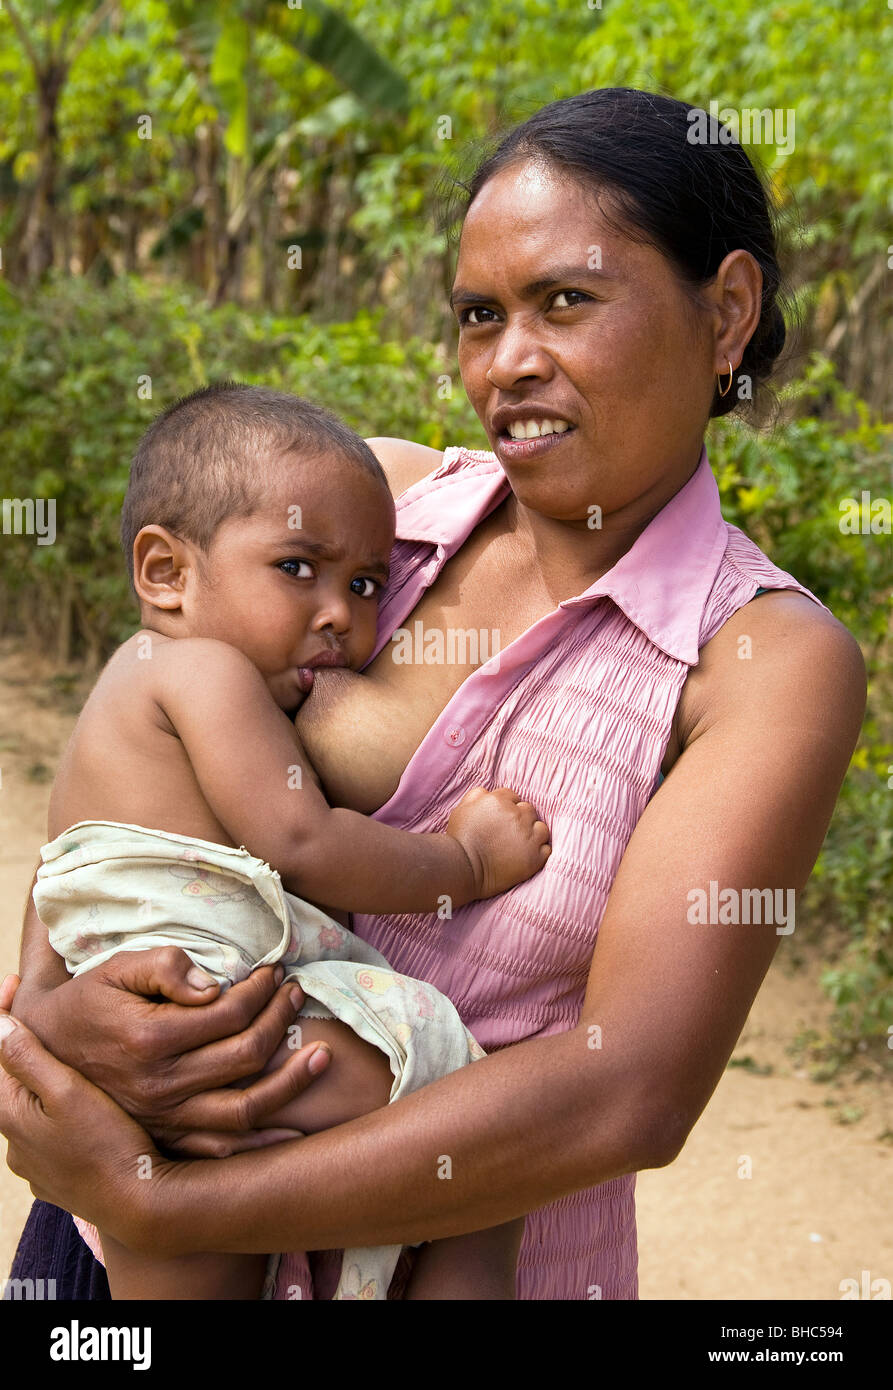 Mother breast feeding her baby at now peaceful Elcolbere village Alieu region EastTimor Stock Photo